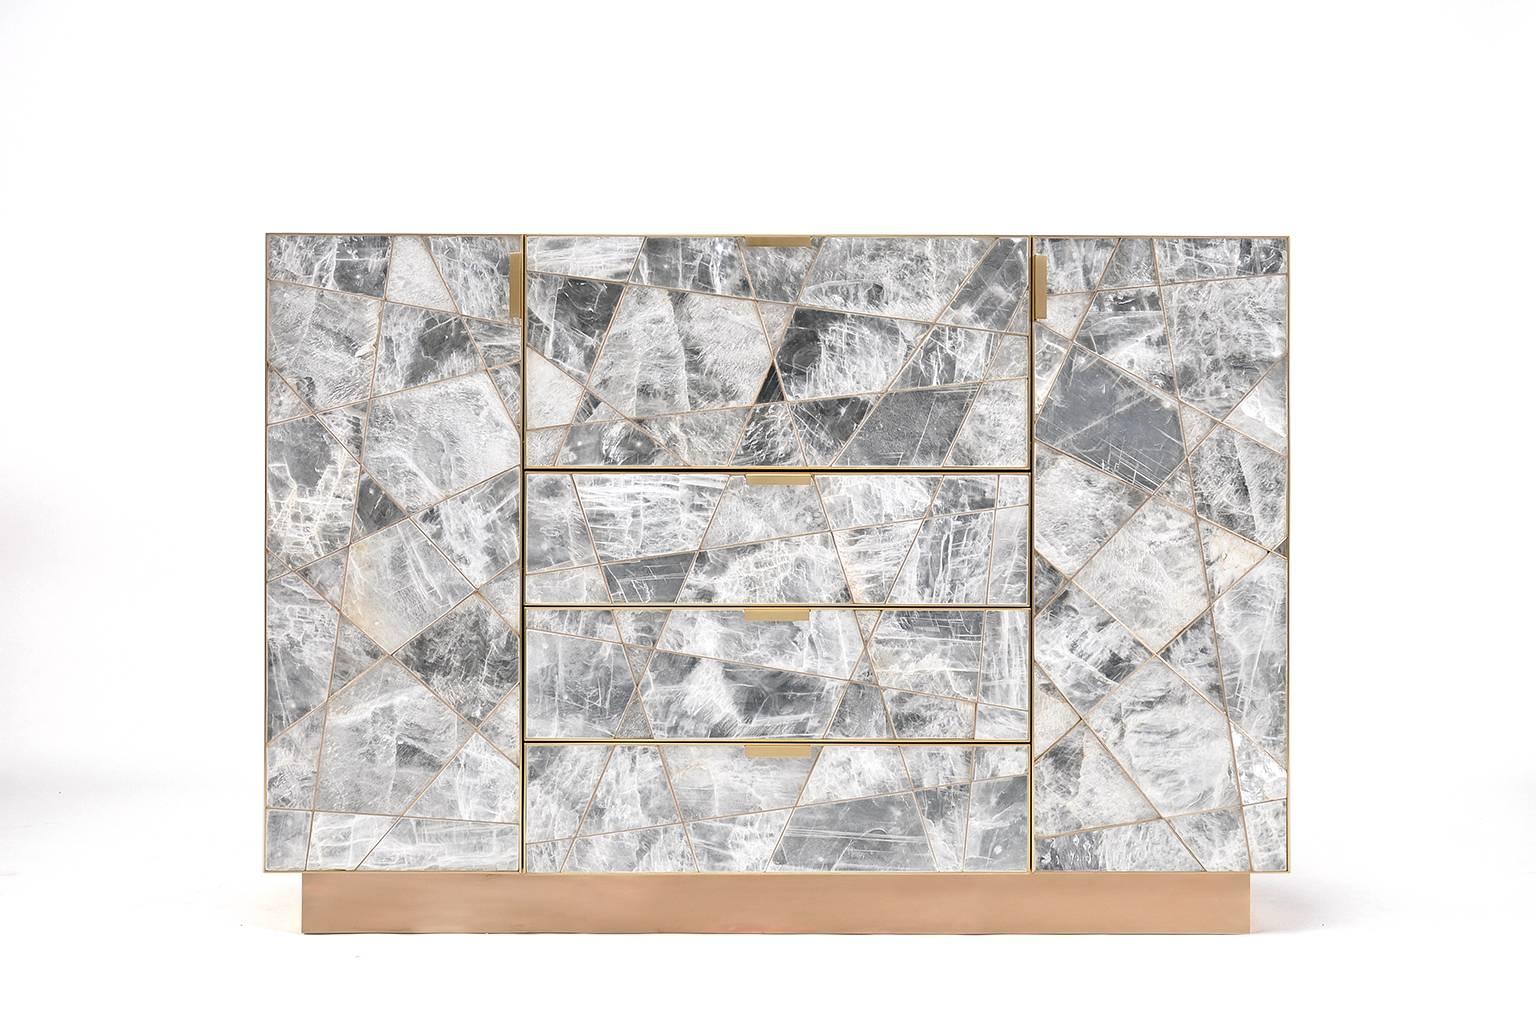 The Mosaic cabinet in selenite, bronze and claro walnut is a strikingly opulent example of a few of the most beautiful materials in the natural world that we have been given as furniture makers to work with. This particular Mosaic Cabinet is